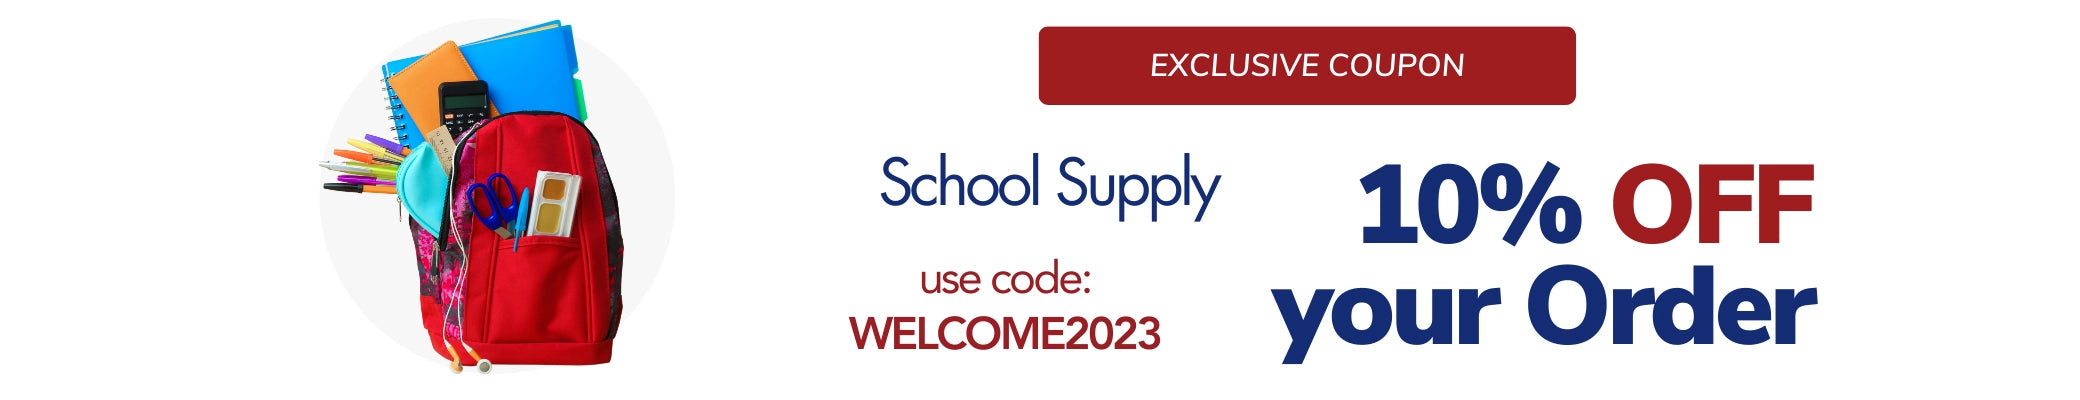 Bag packs, pencil cases, pencils, pens and much more school supply with 10%off when using the code WELCOME2023